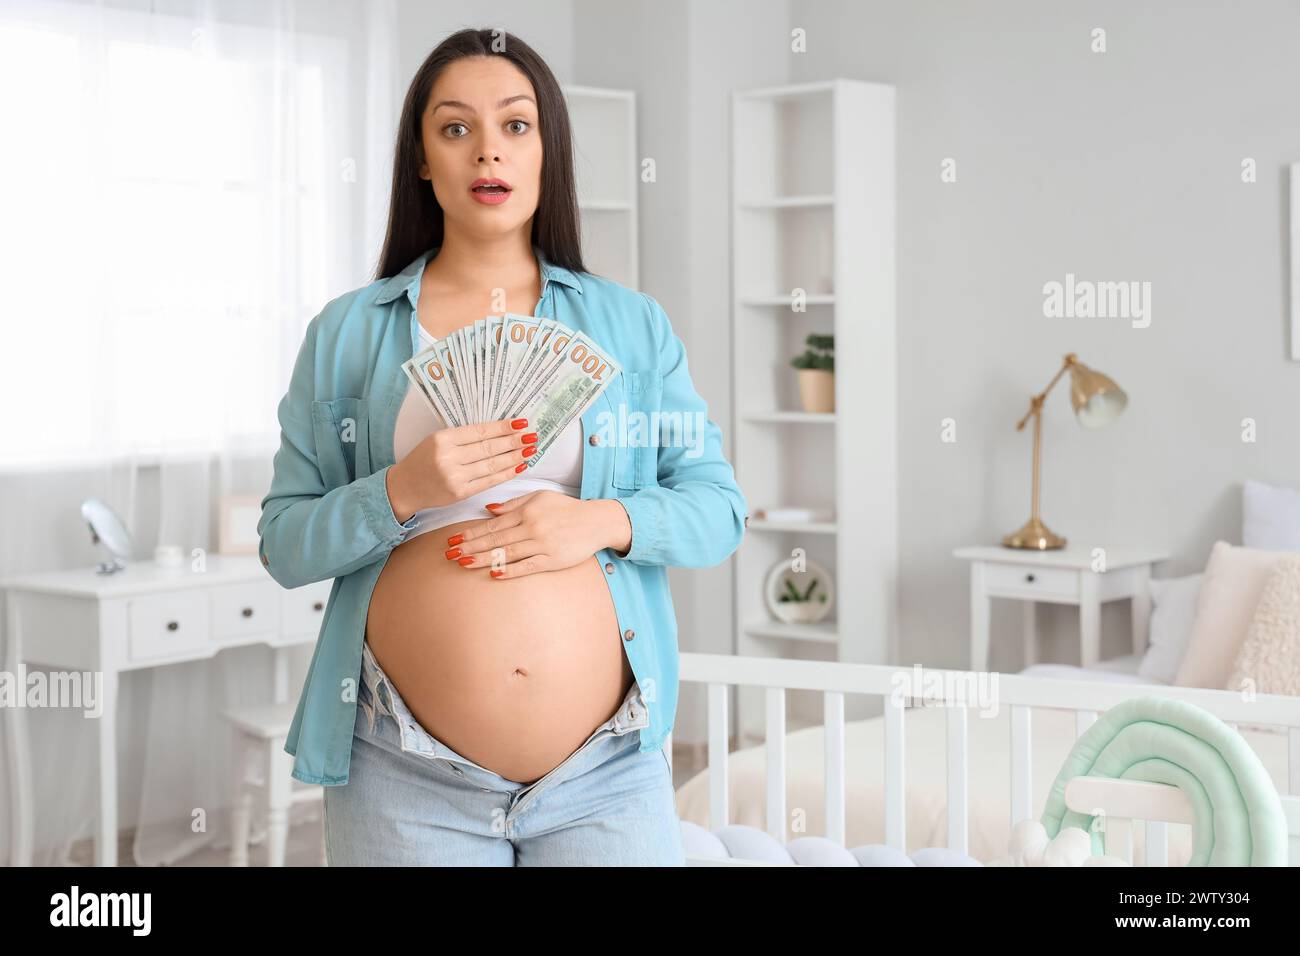 Shocked young pregnant woman with money in children's bedroom. Maternity Benefit concept Stock Photo